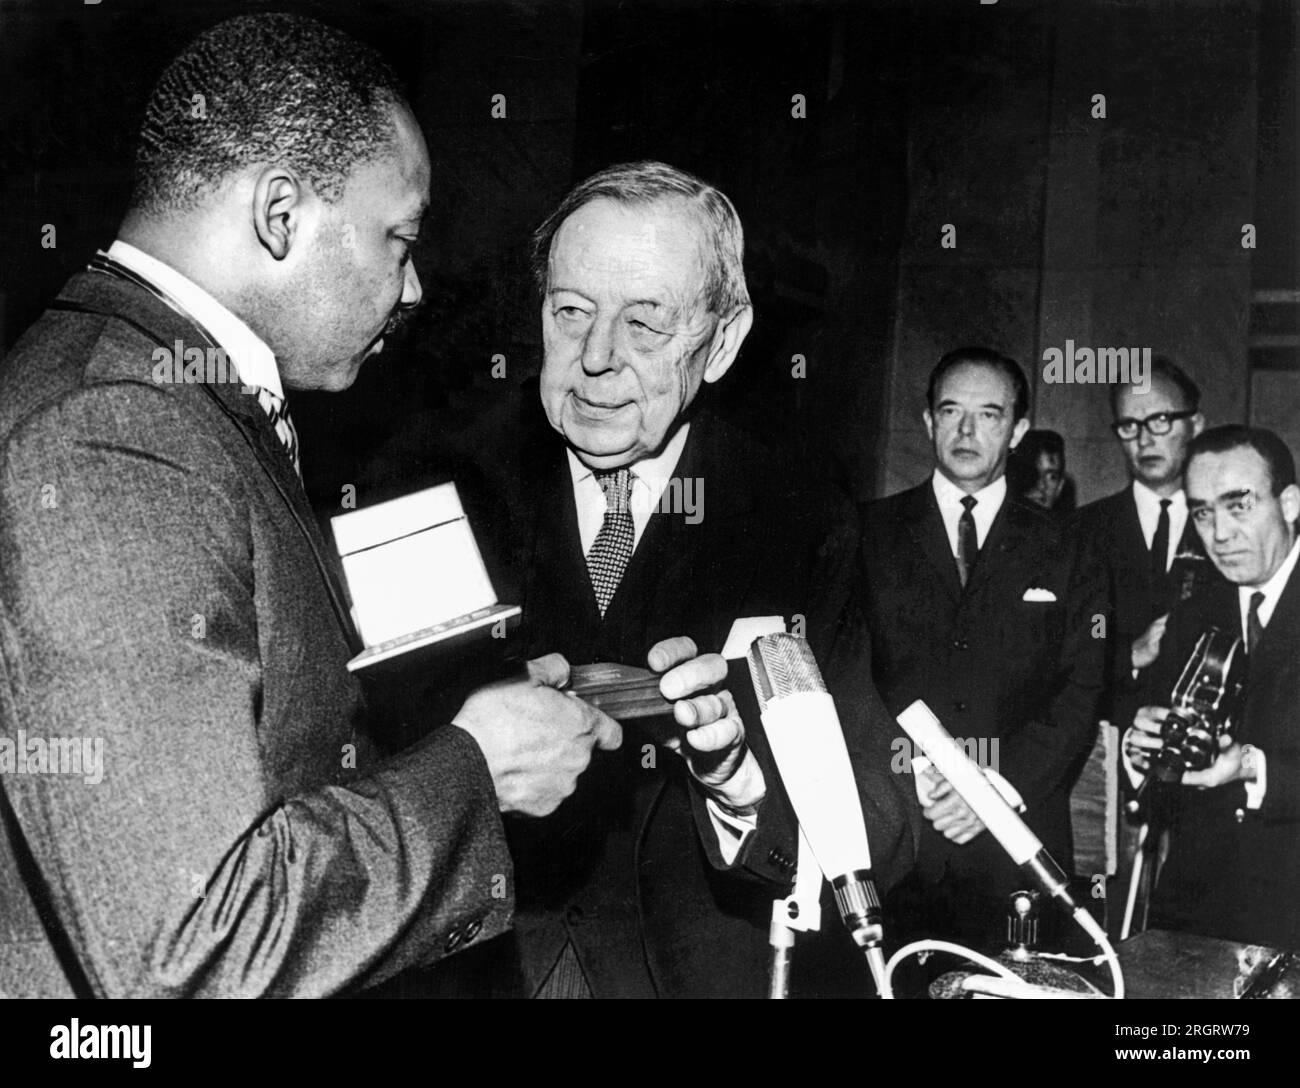 Oslo, Norway,  December 10, 1964 Rev. Martin Luther King, Jr., receives the Nobel Peace Price from Gunnar Jann, chairman of the Nobel Prize Committee, for his 'non-violent' leadership of the American civil rights movement. Stock Photo